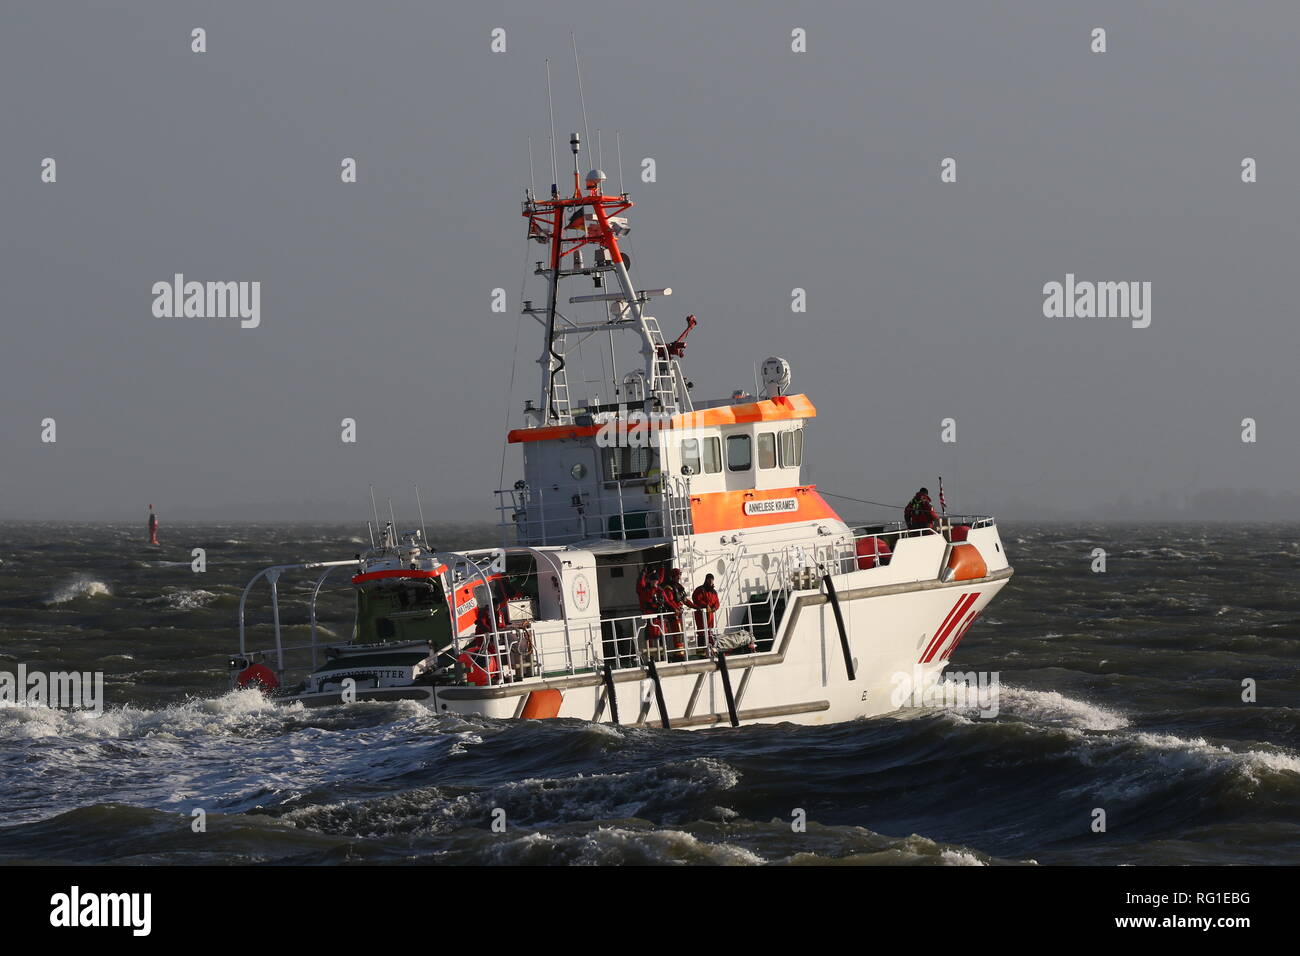 The SAR ship Anneliese Kramer passes on January 1, 2019 the port of Cuxhaven in a stormy sea. Stock Photo